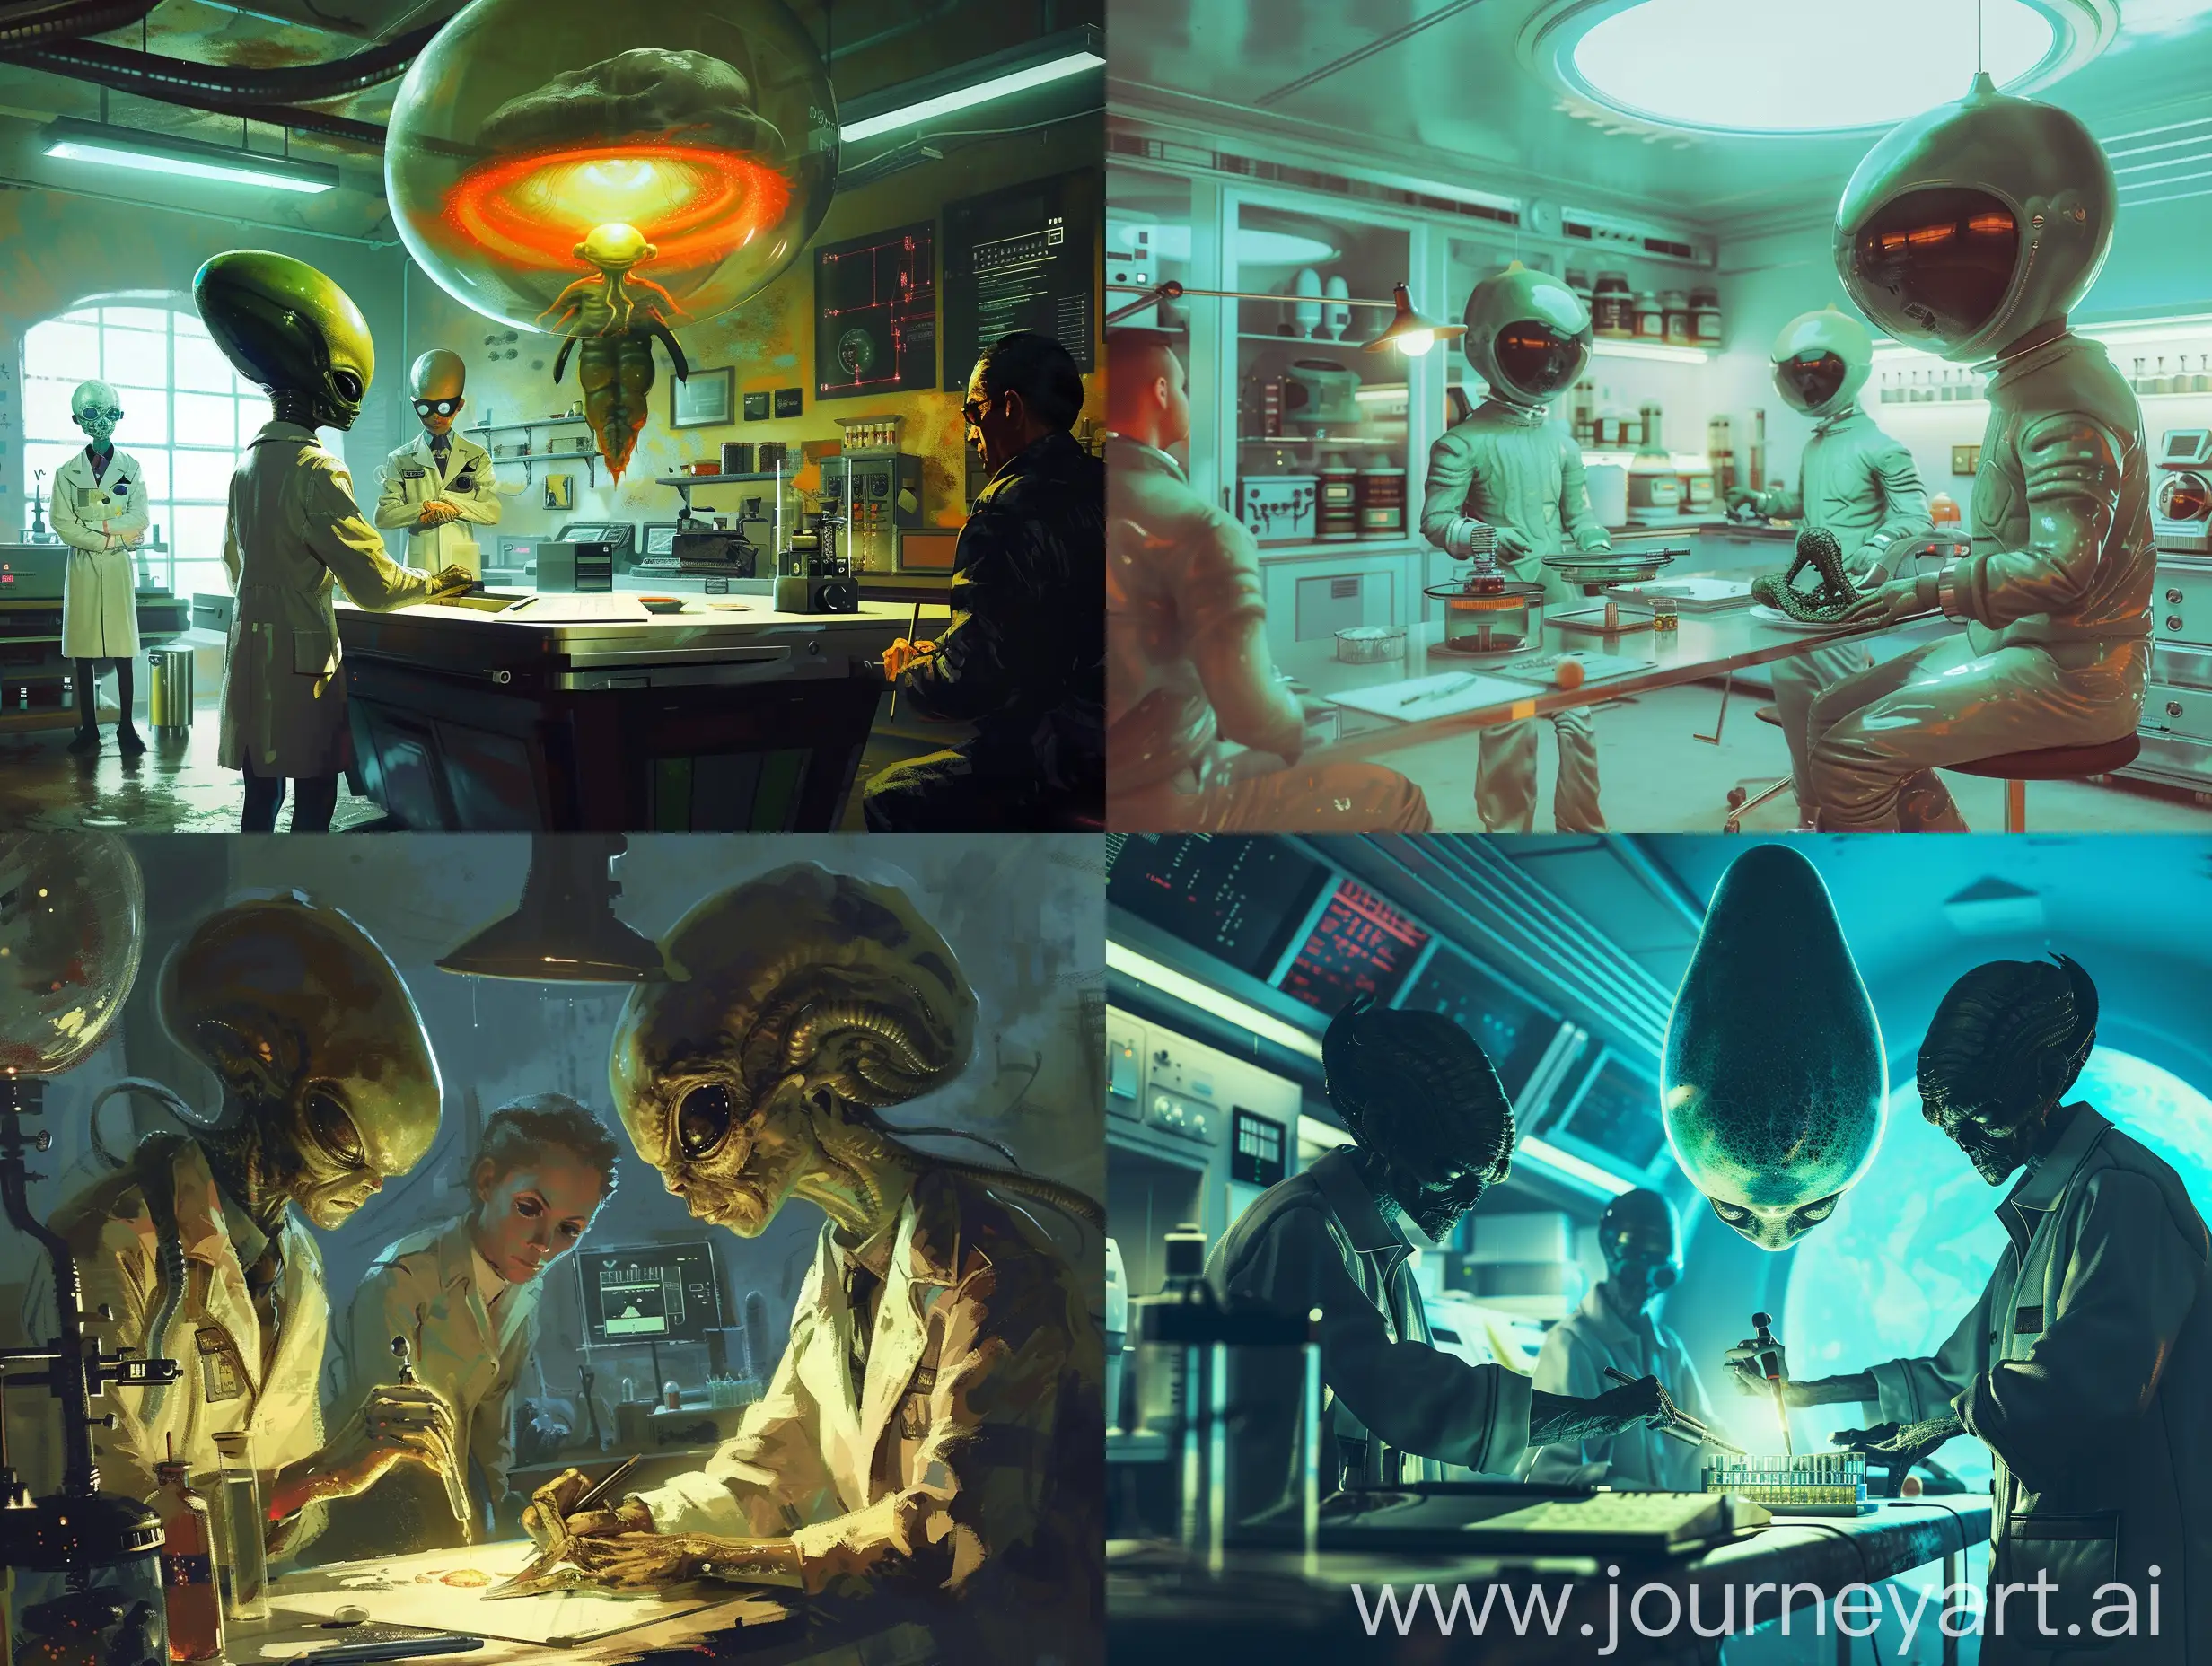  Scientists studying an alien life form in a secret laboratory, retro-futurism, weird. 